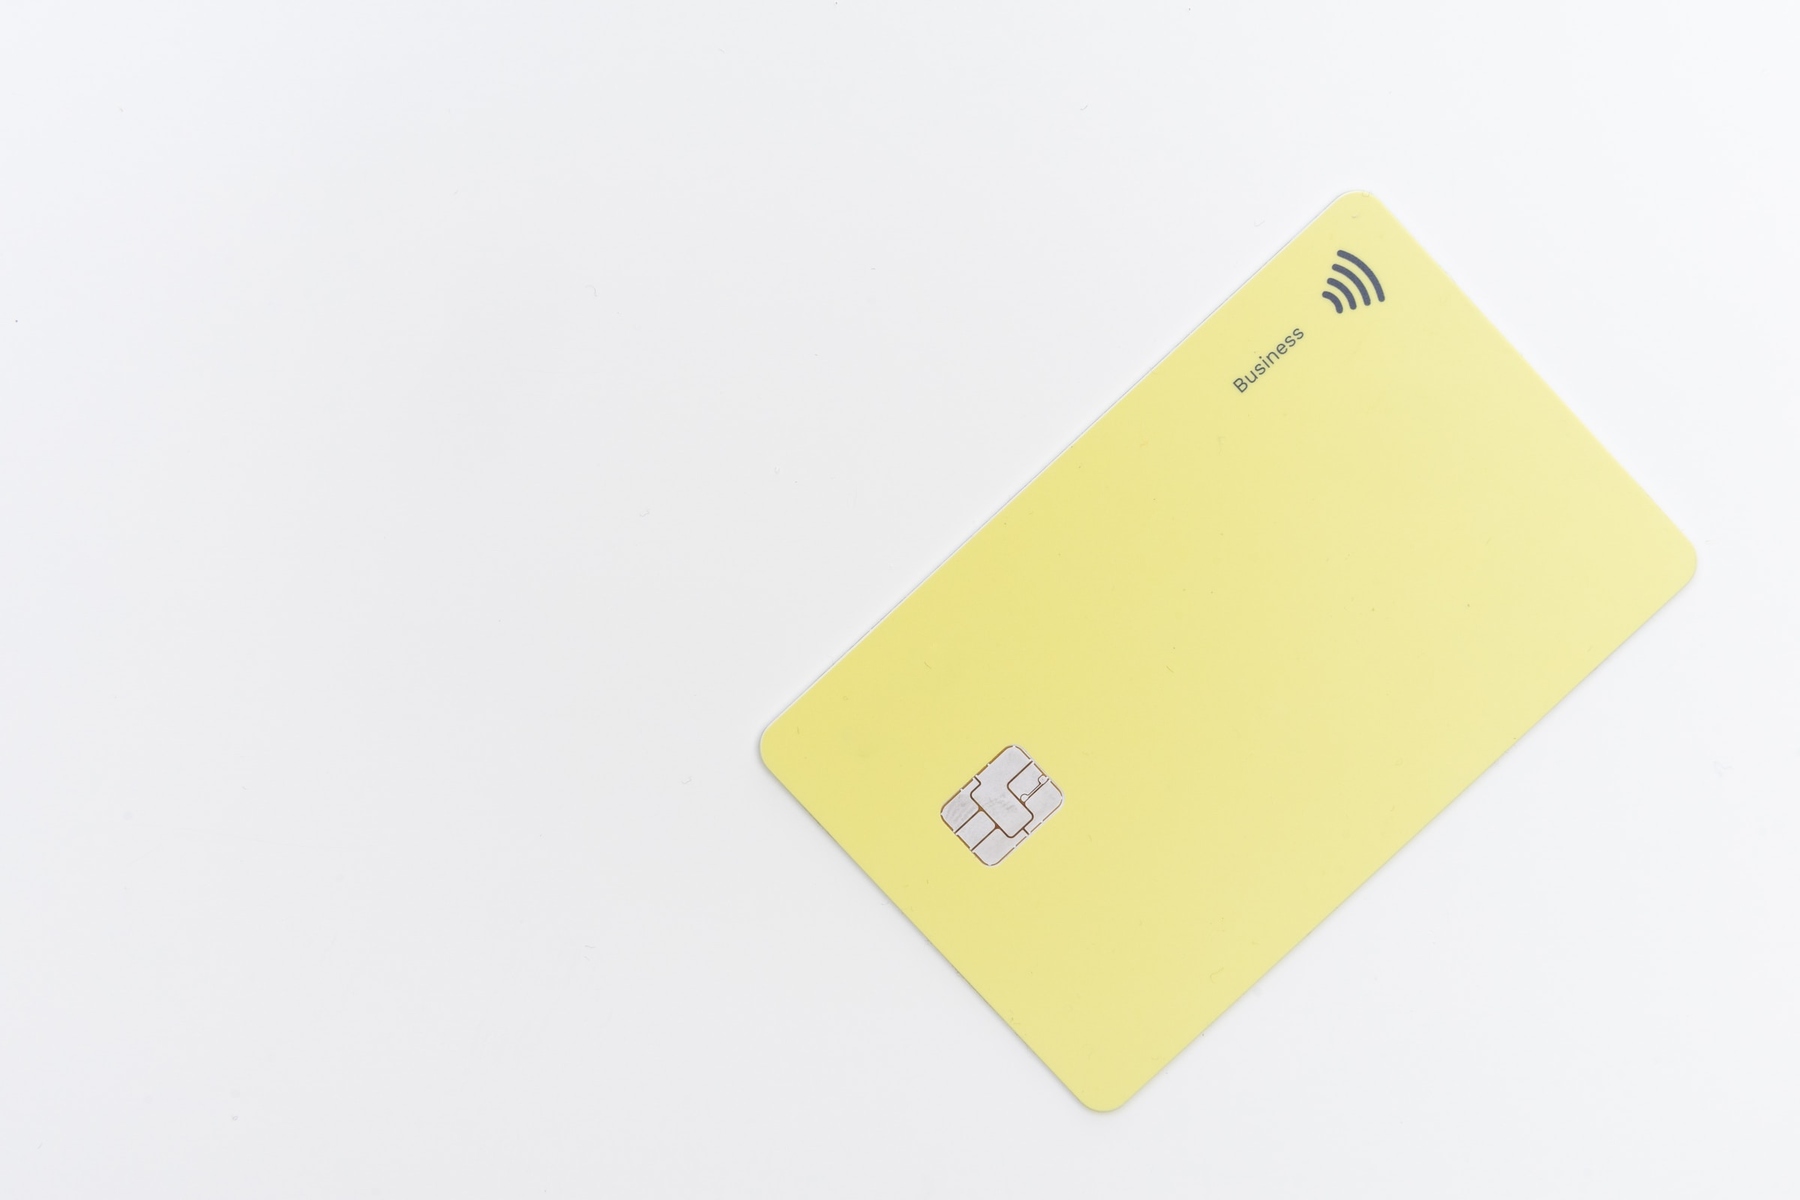 A yellow credit card on a white background